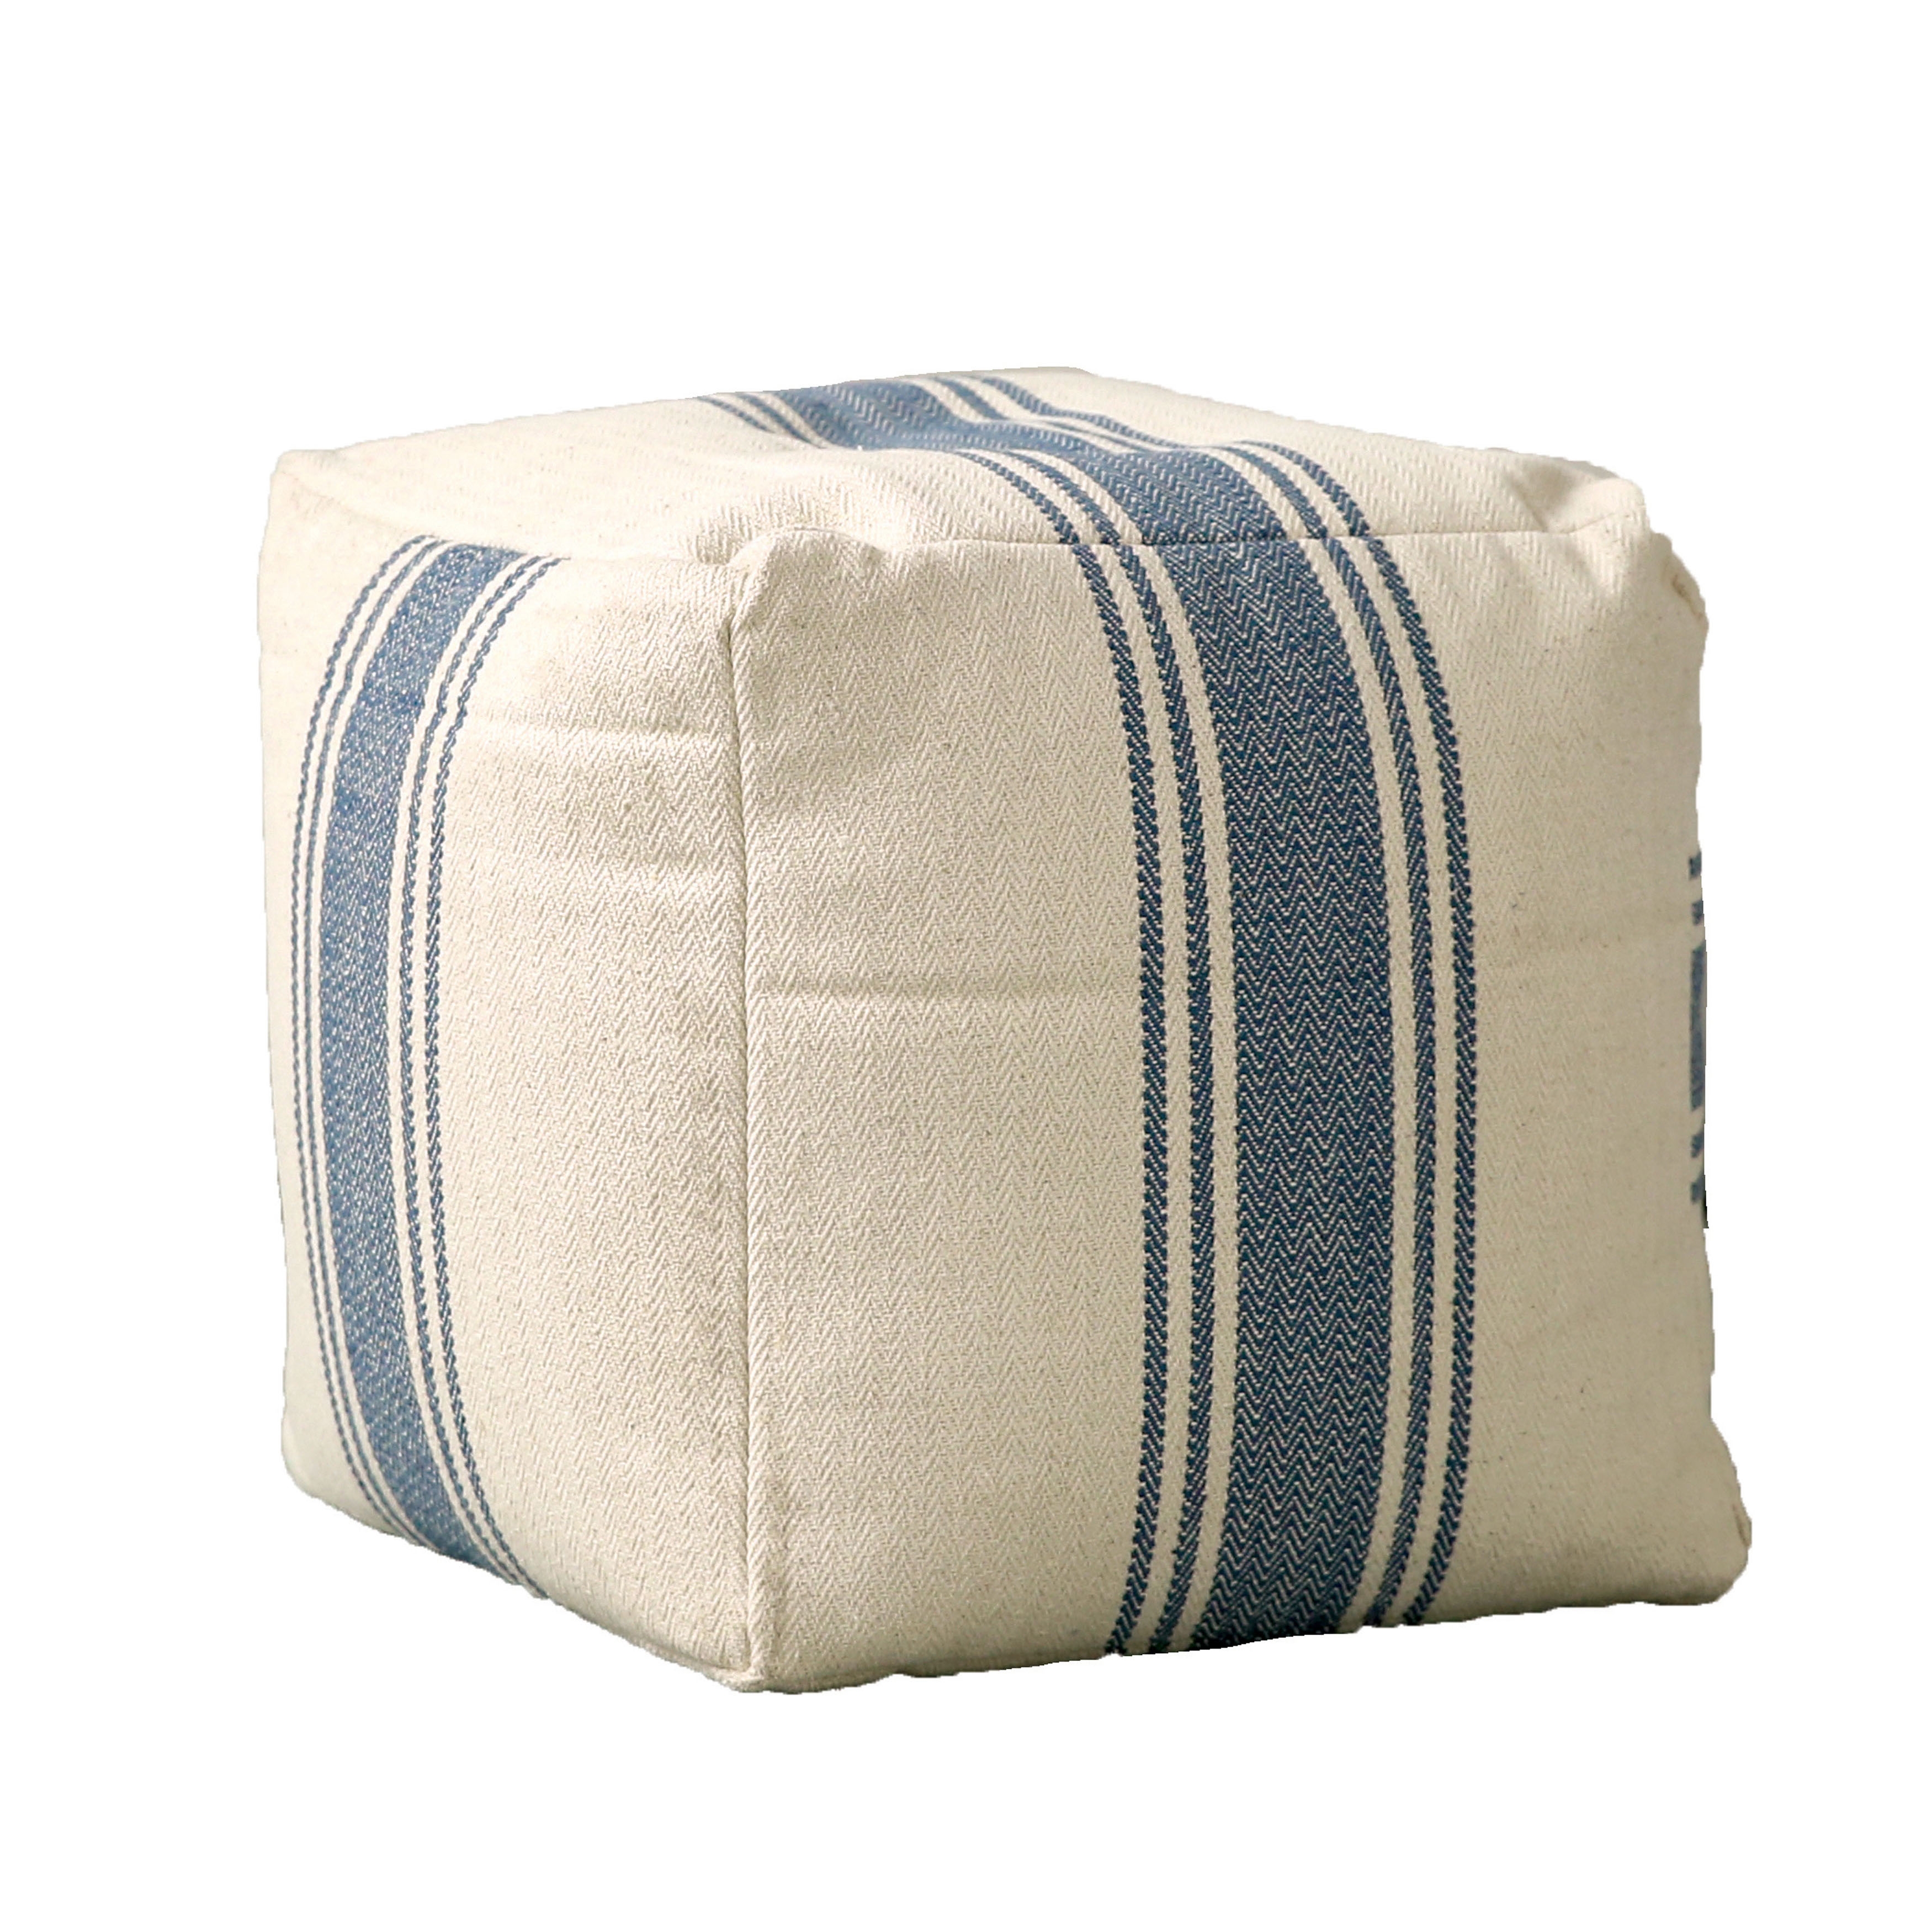 Cream Pouf with Blue Stripes - Image 0